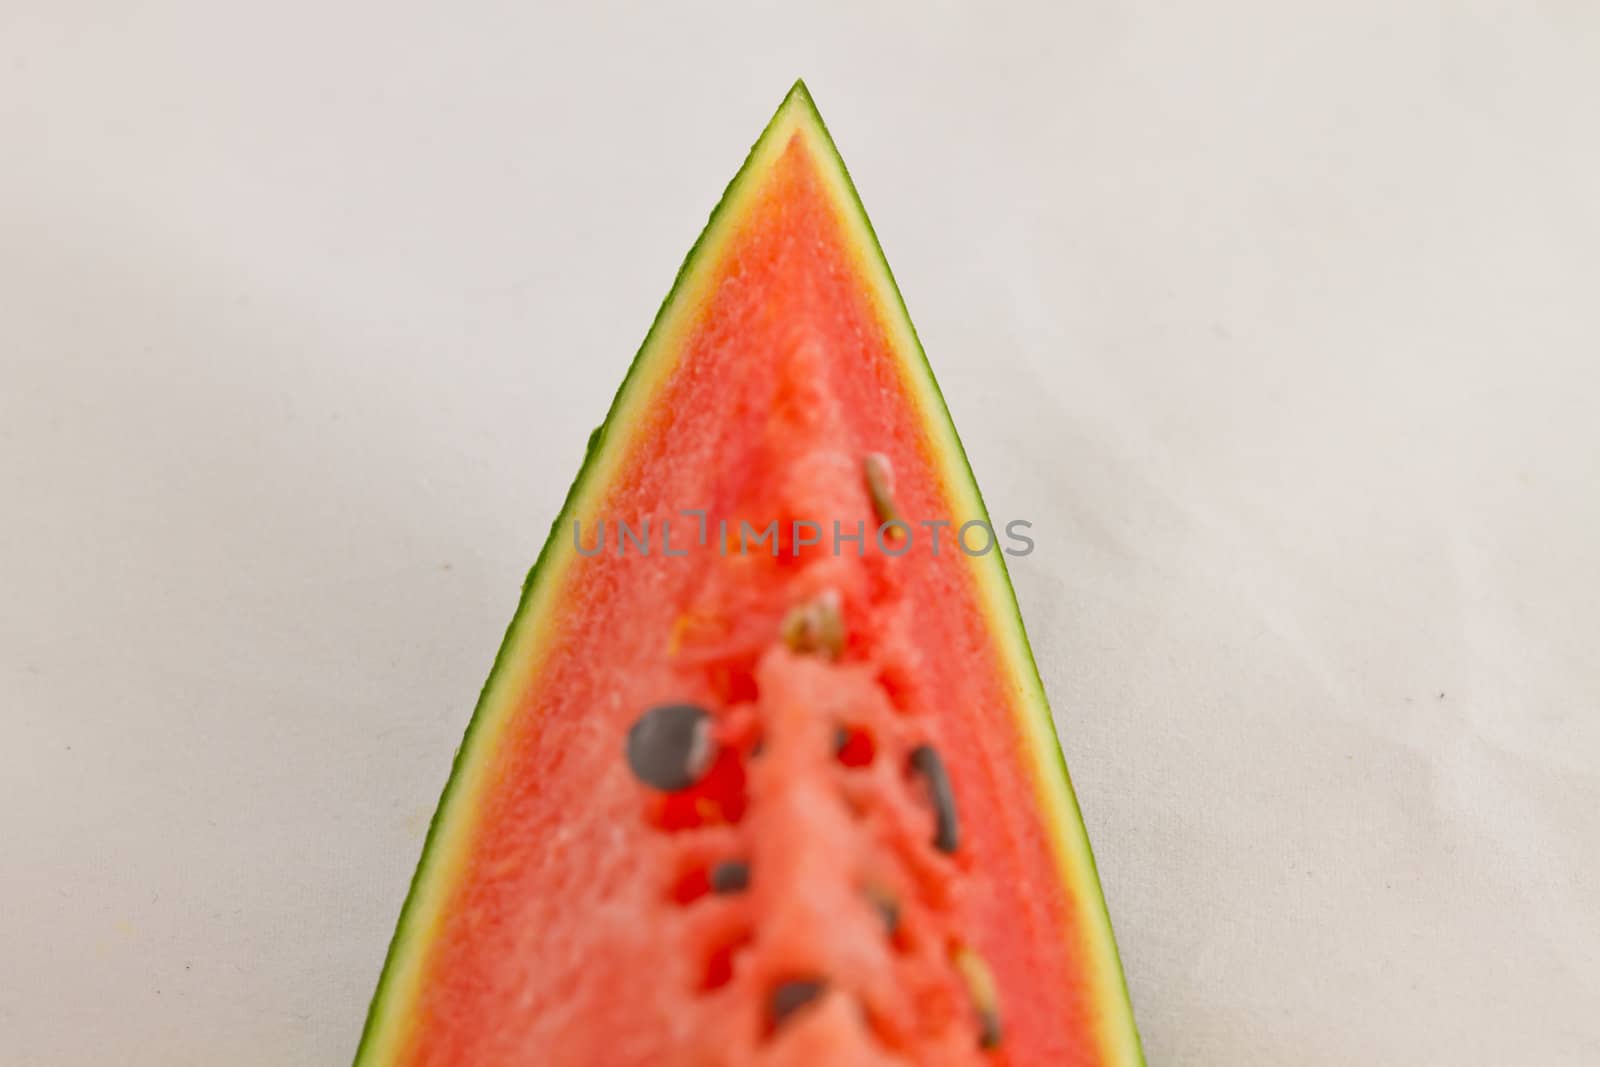 slice of watermelon by noombp